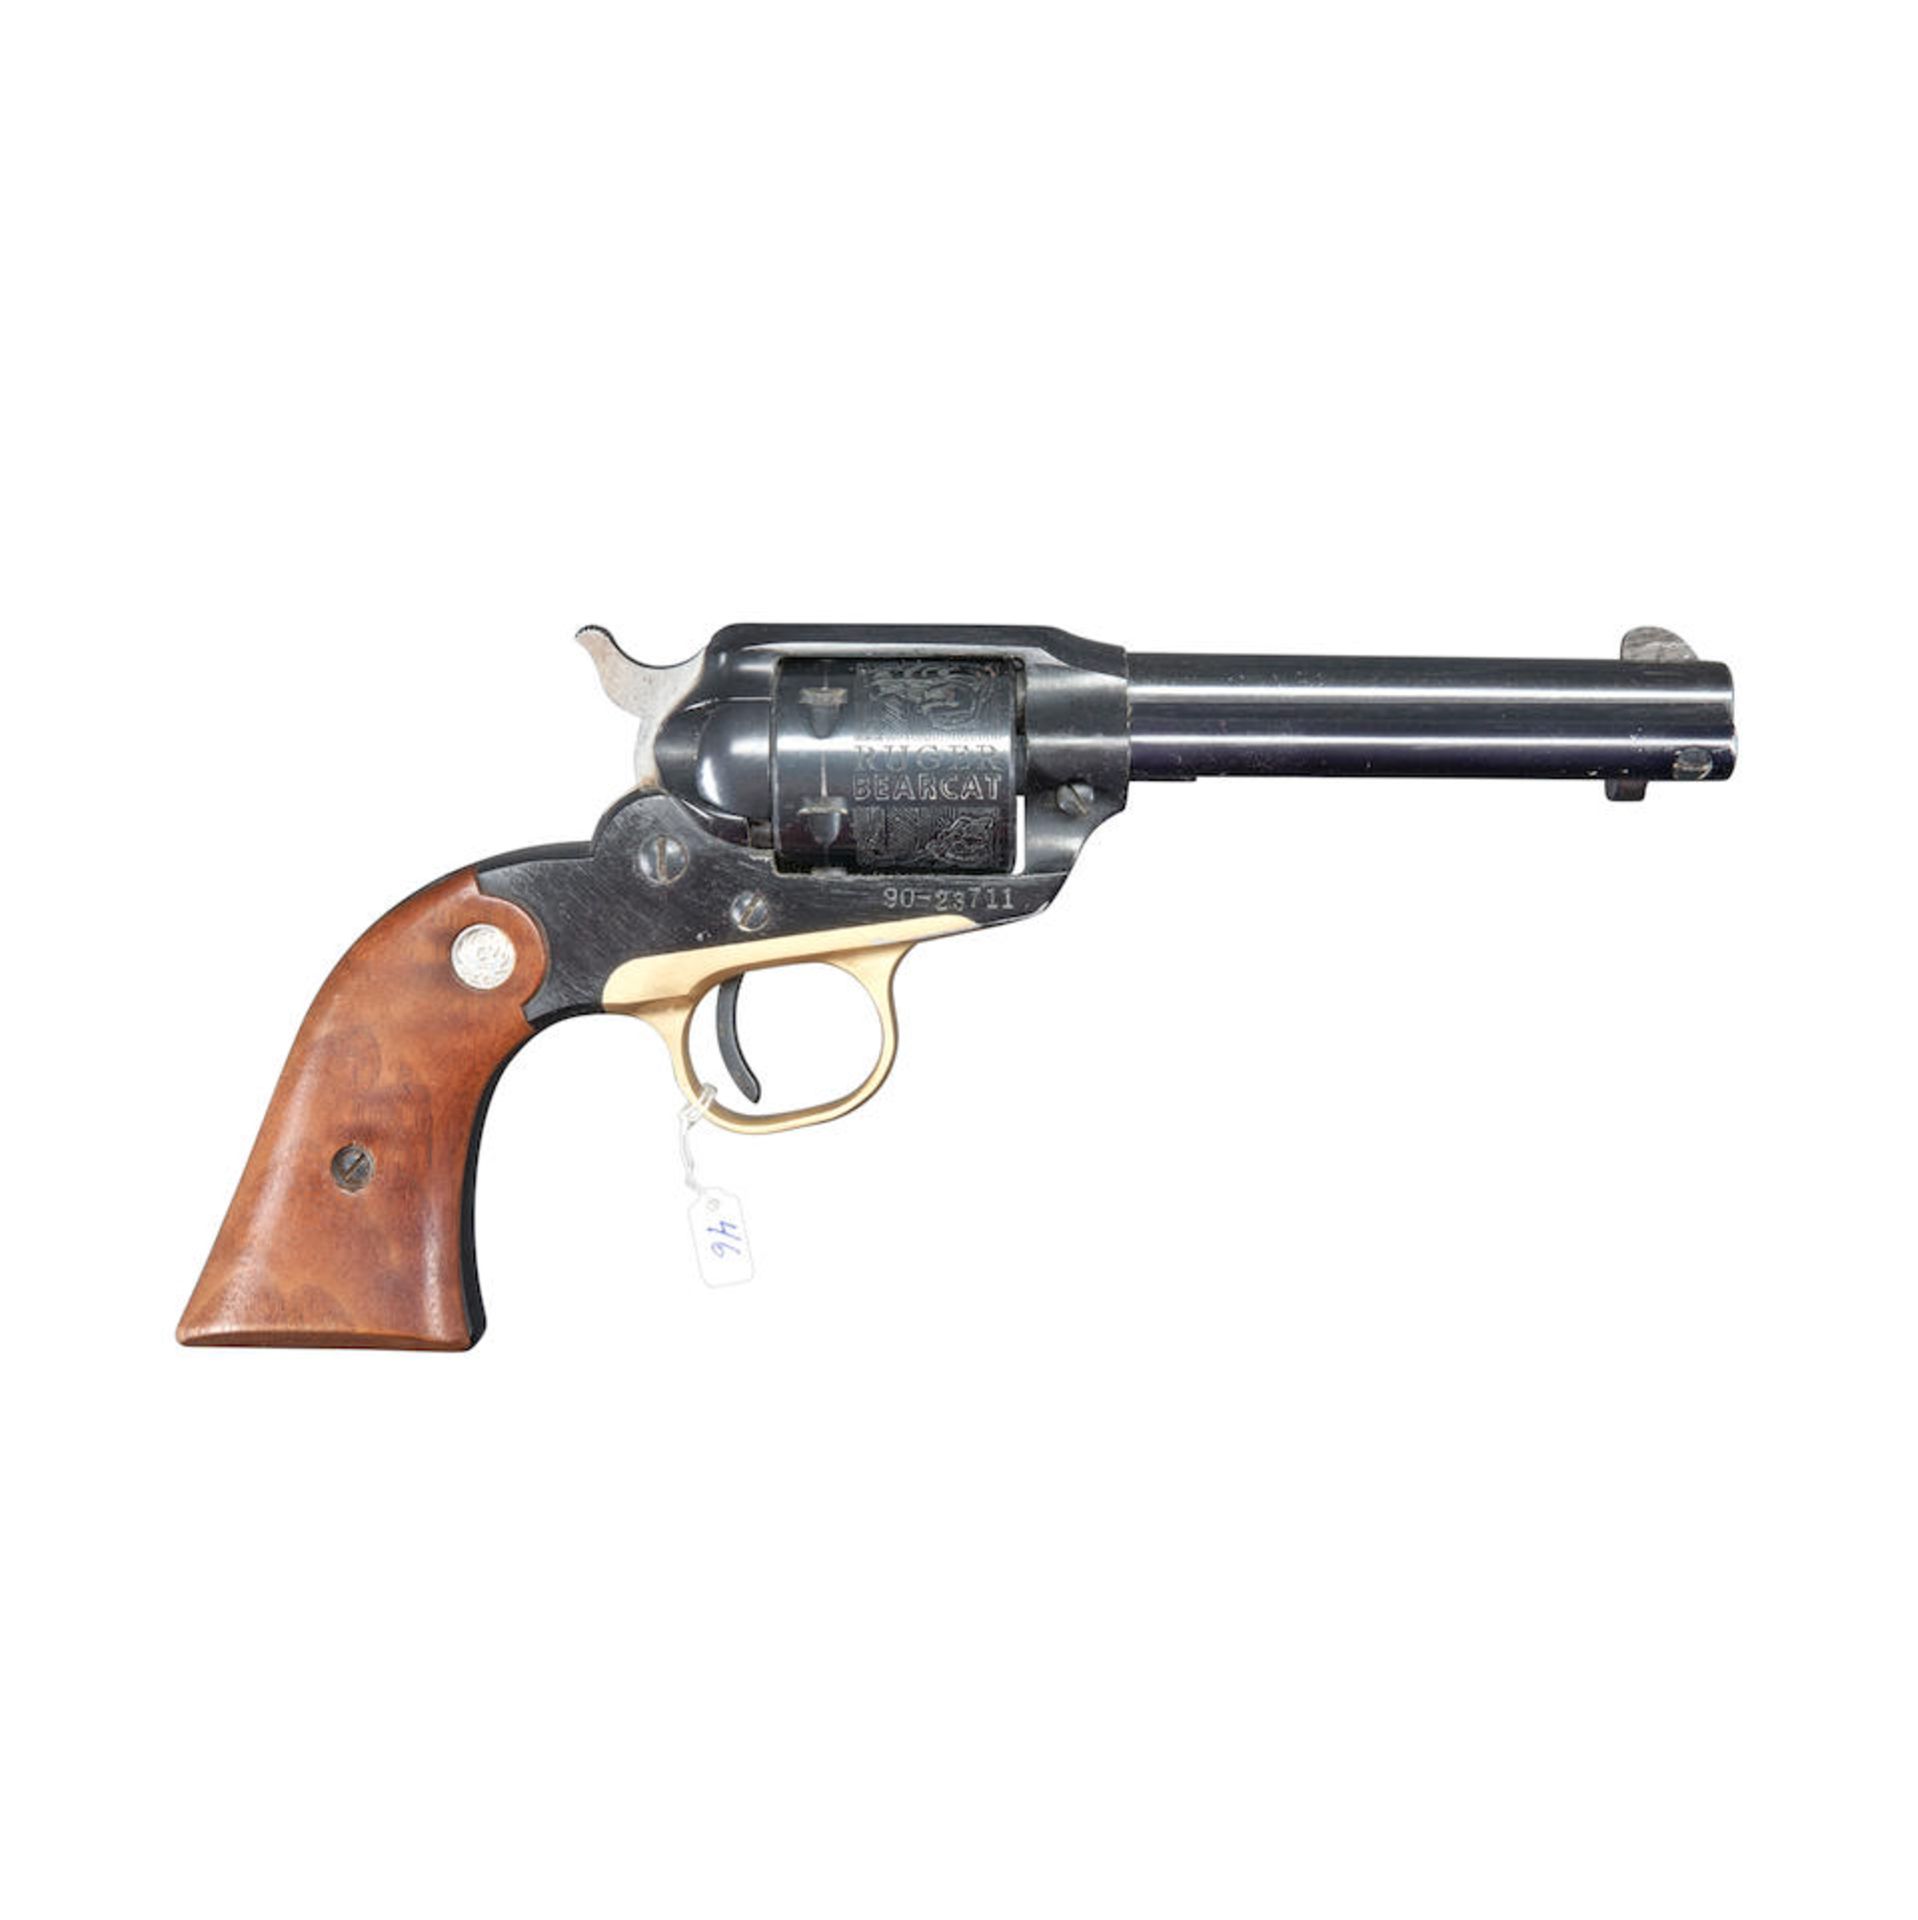 Ruger Bearcat and Super Bearcat Single Action Revolvers with Non-standard Barrel Markings, Curio... - Image 9 of 9